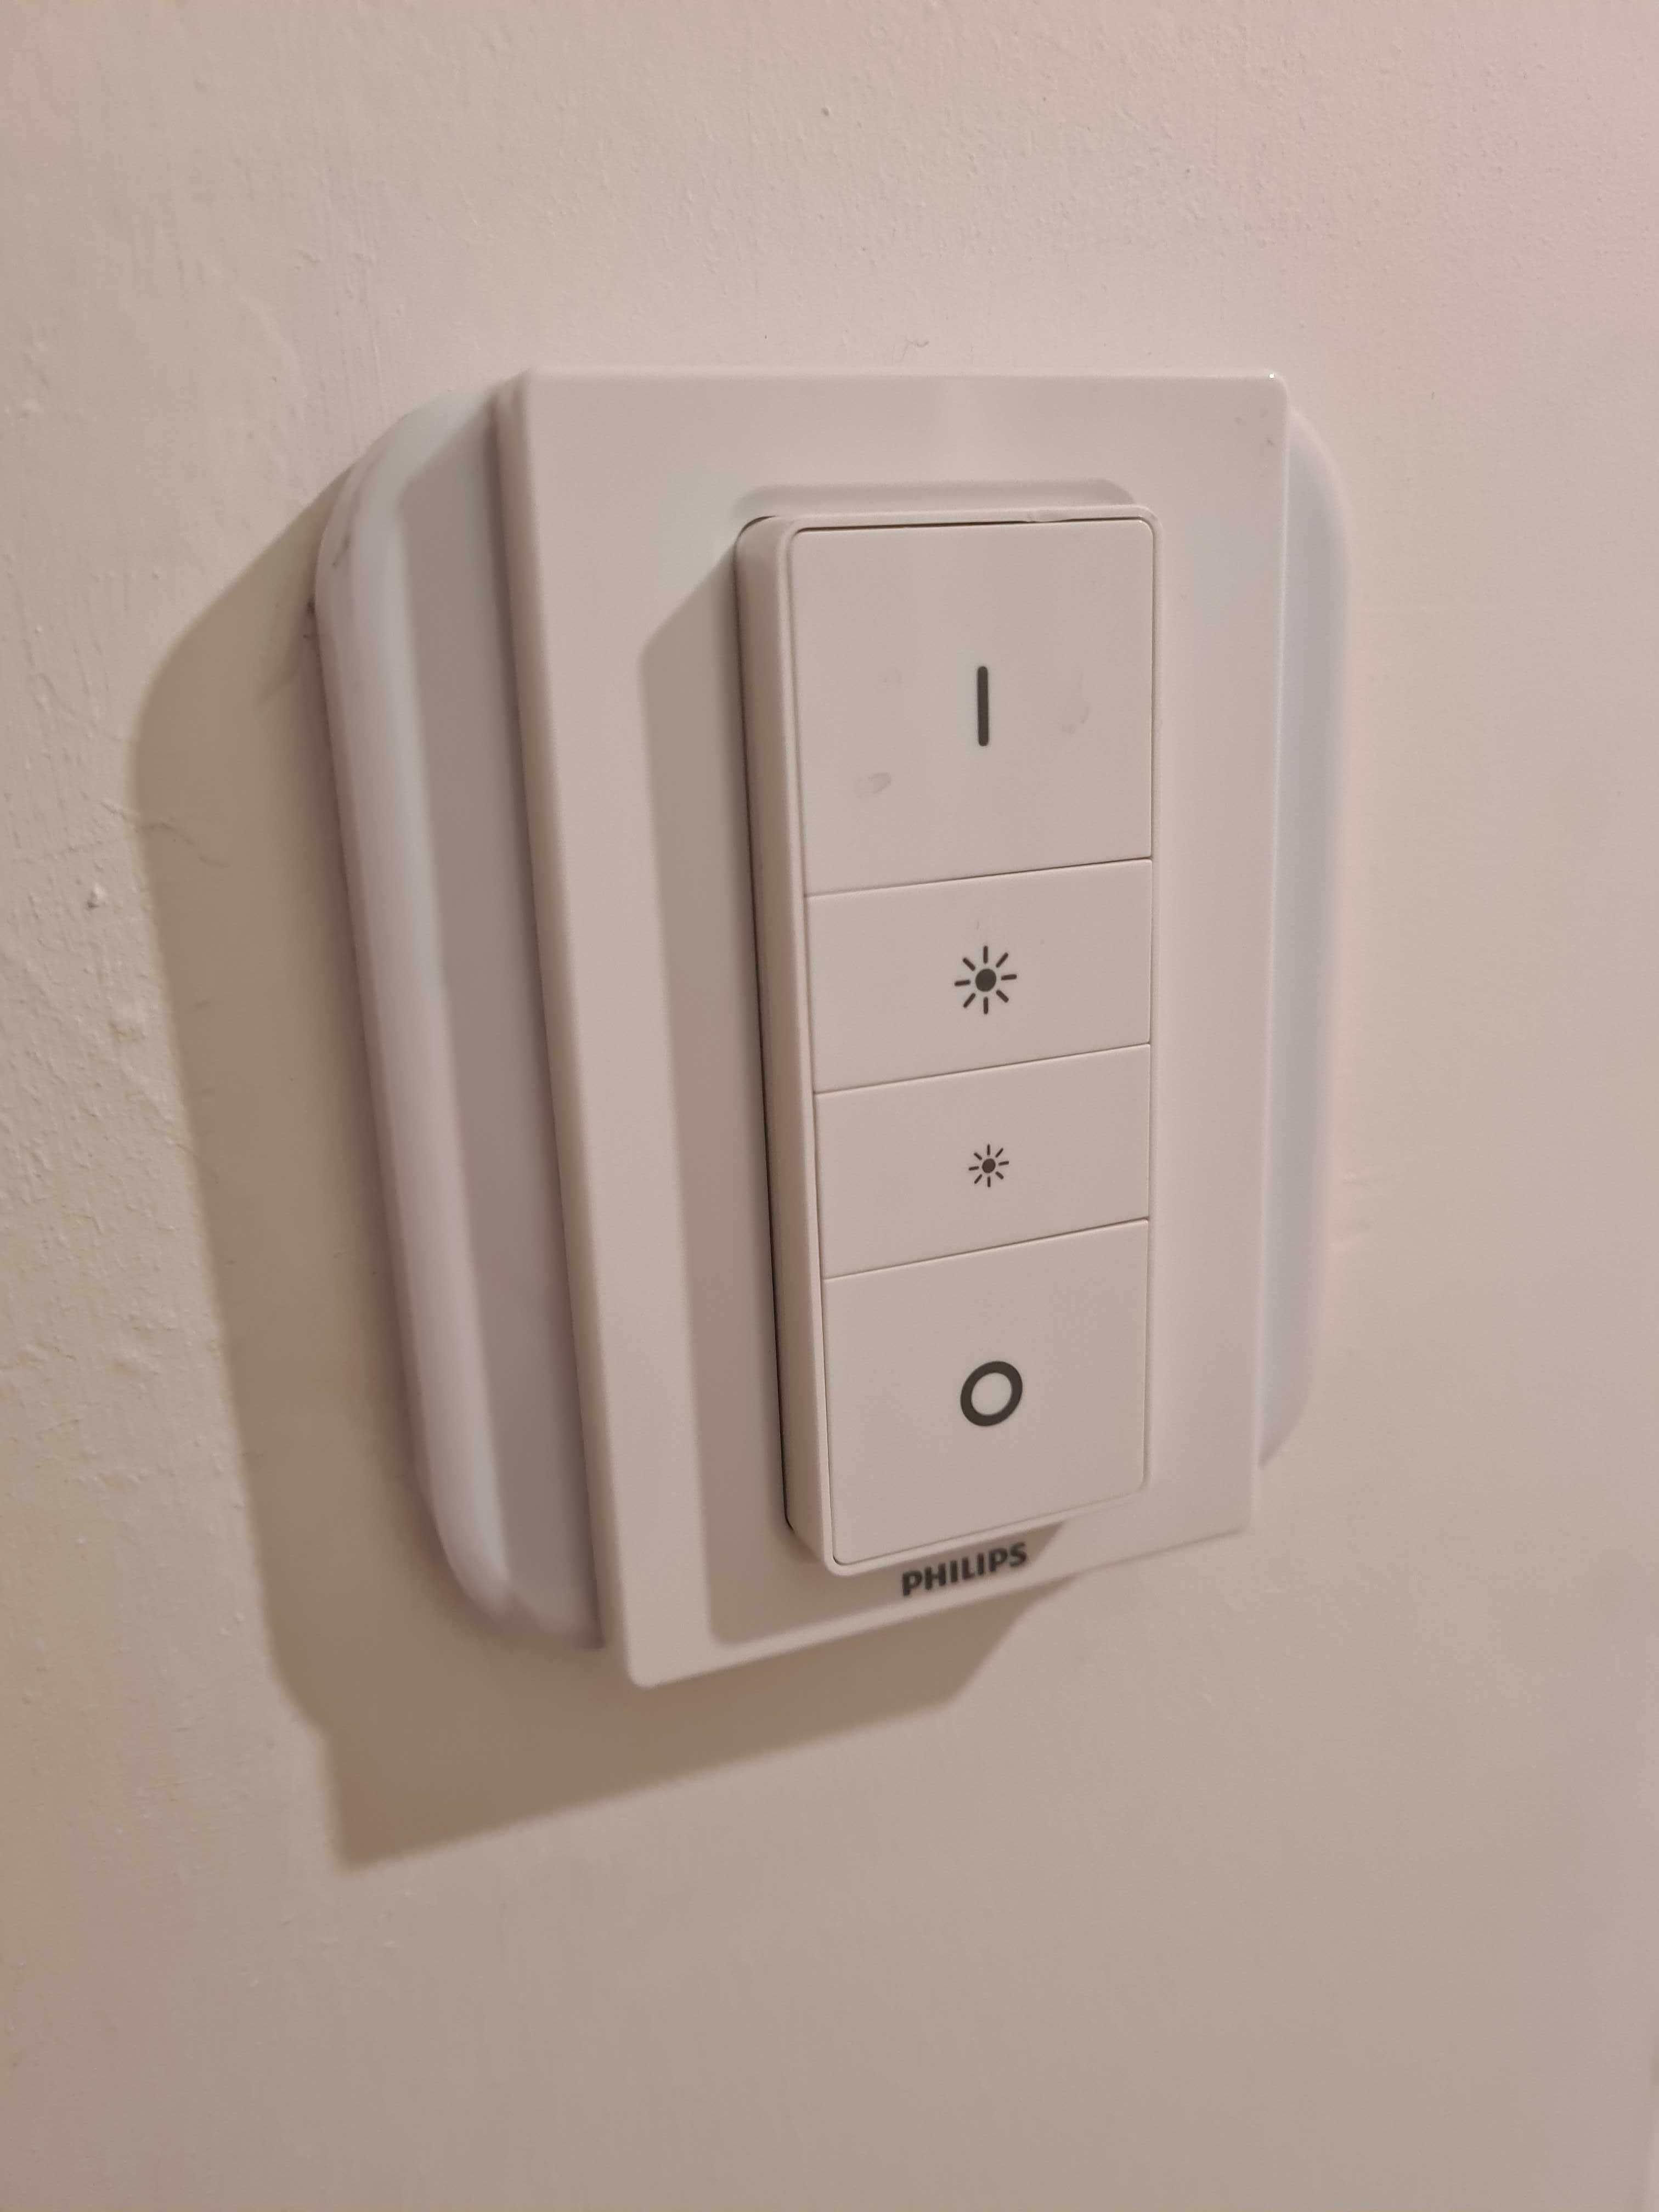 Philip Hue mount over normal light switch, with magnetic removable remote